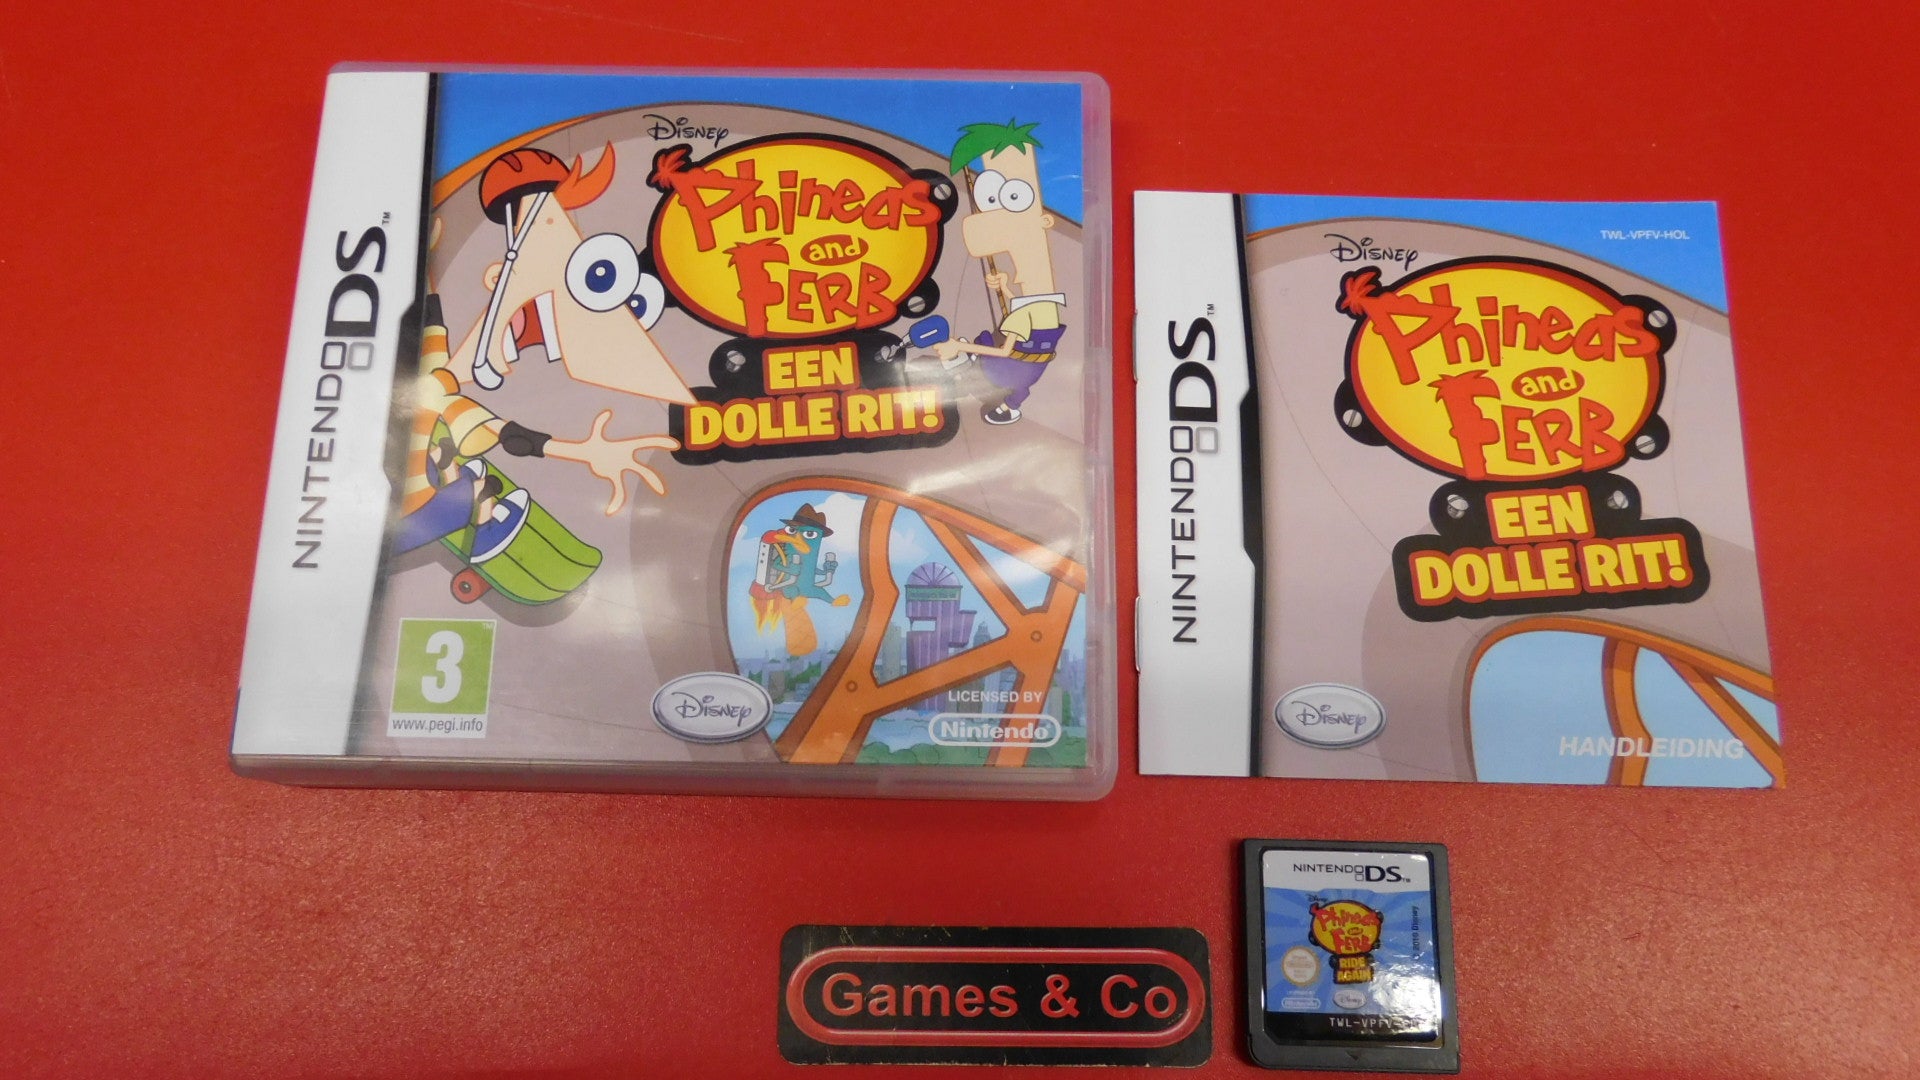 PHINEAS AND FERB EEN DOLLE RIT